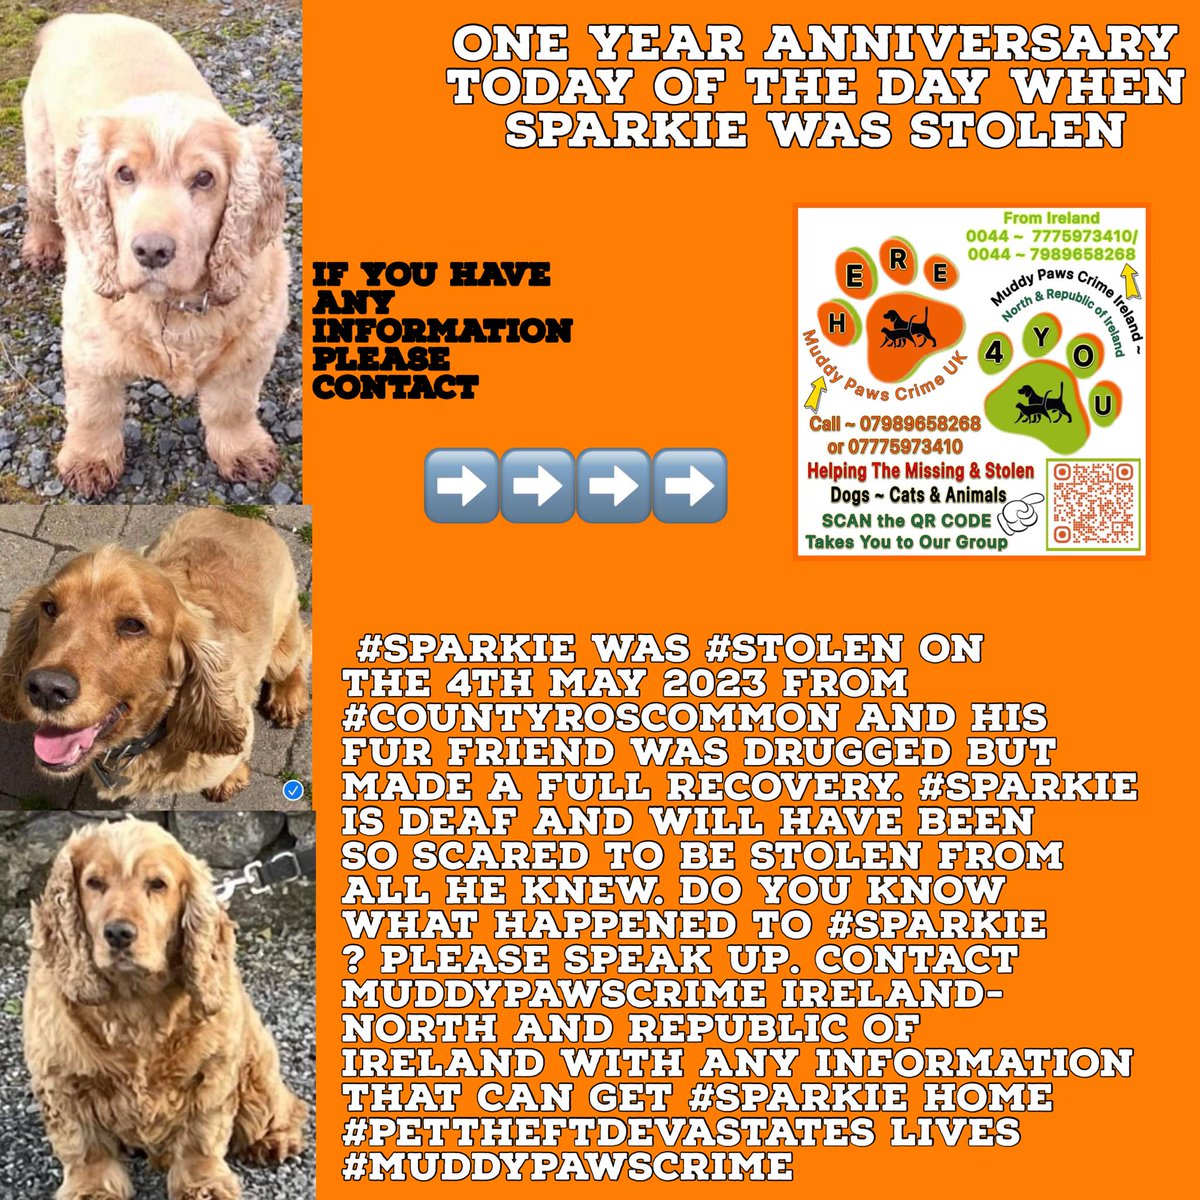 ONE YEAR AGO SPARKIE WAS STOLEN :( Stolen 4/5/23 from Athlone Co. Roscommon. His sibling was drugged but was left behind, but luckily made a full recovery. PLS SHARE AND GET IN CONTACT WITH MUDDYPAWSCRIME IF YOU HAVE ANY INFORMATION @rosieDoc2 @HunnyJax